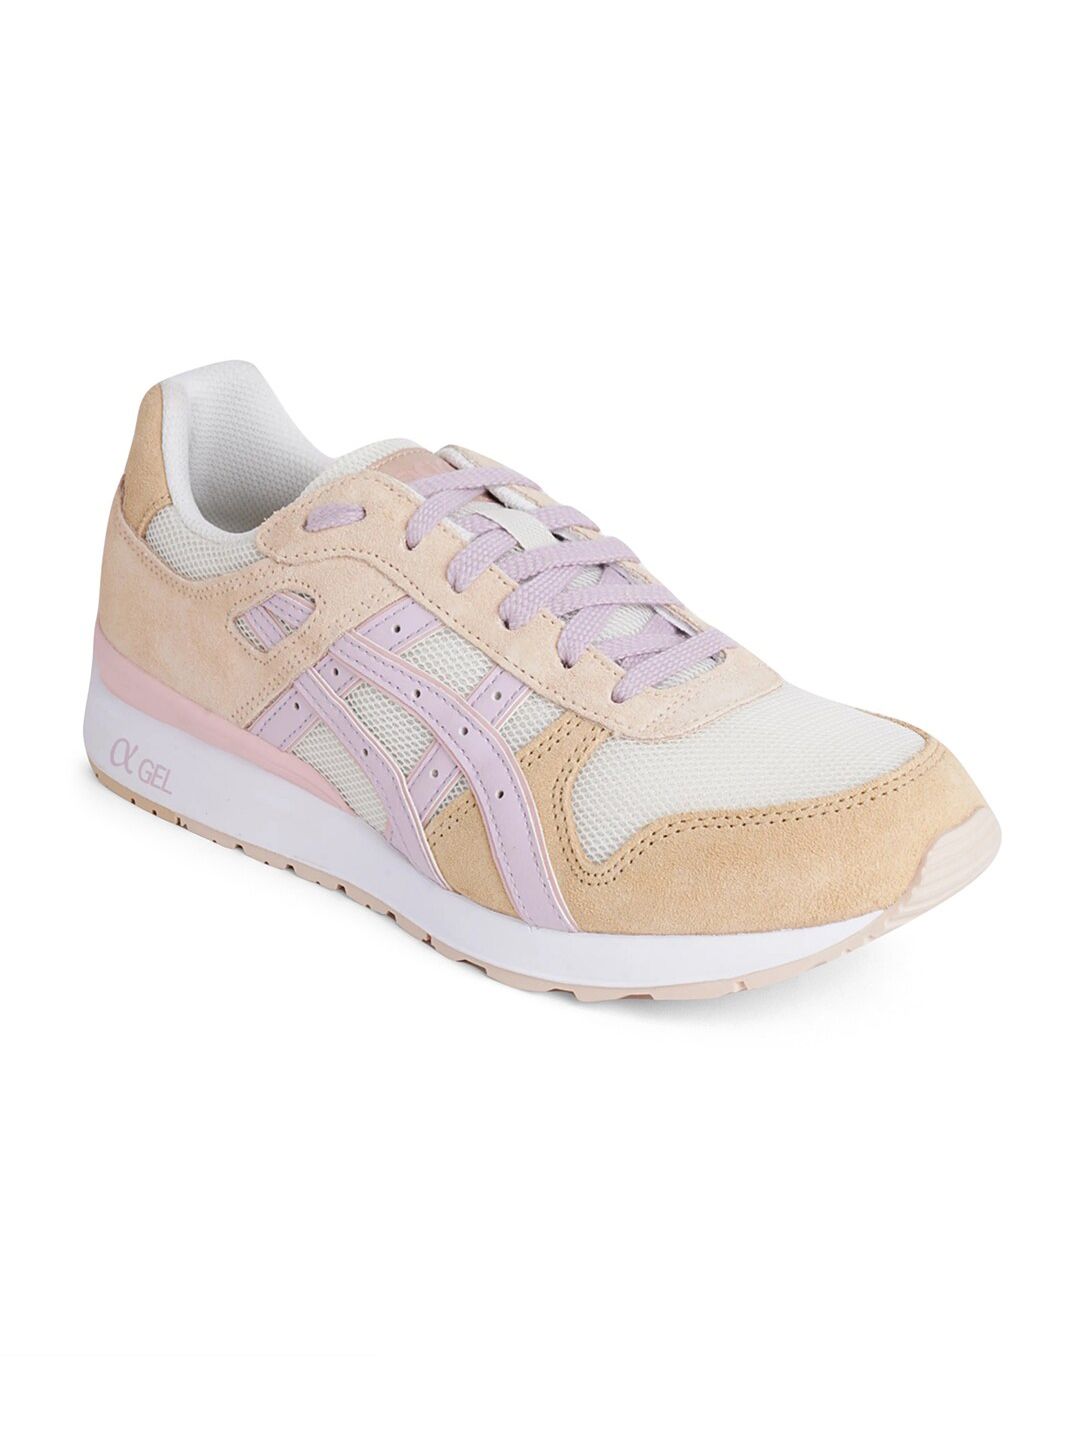 ASICS Women GT-II Training or Gym Non-Marking Shoes Price in India